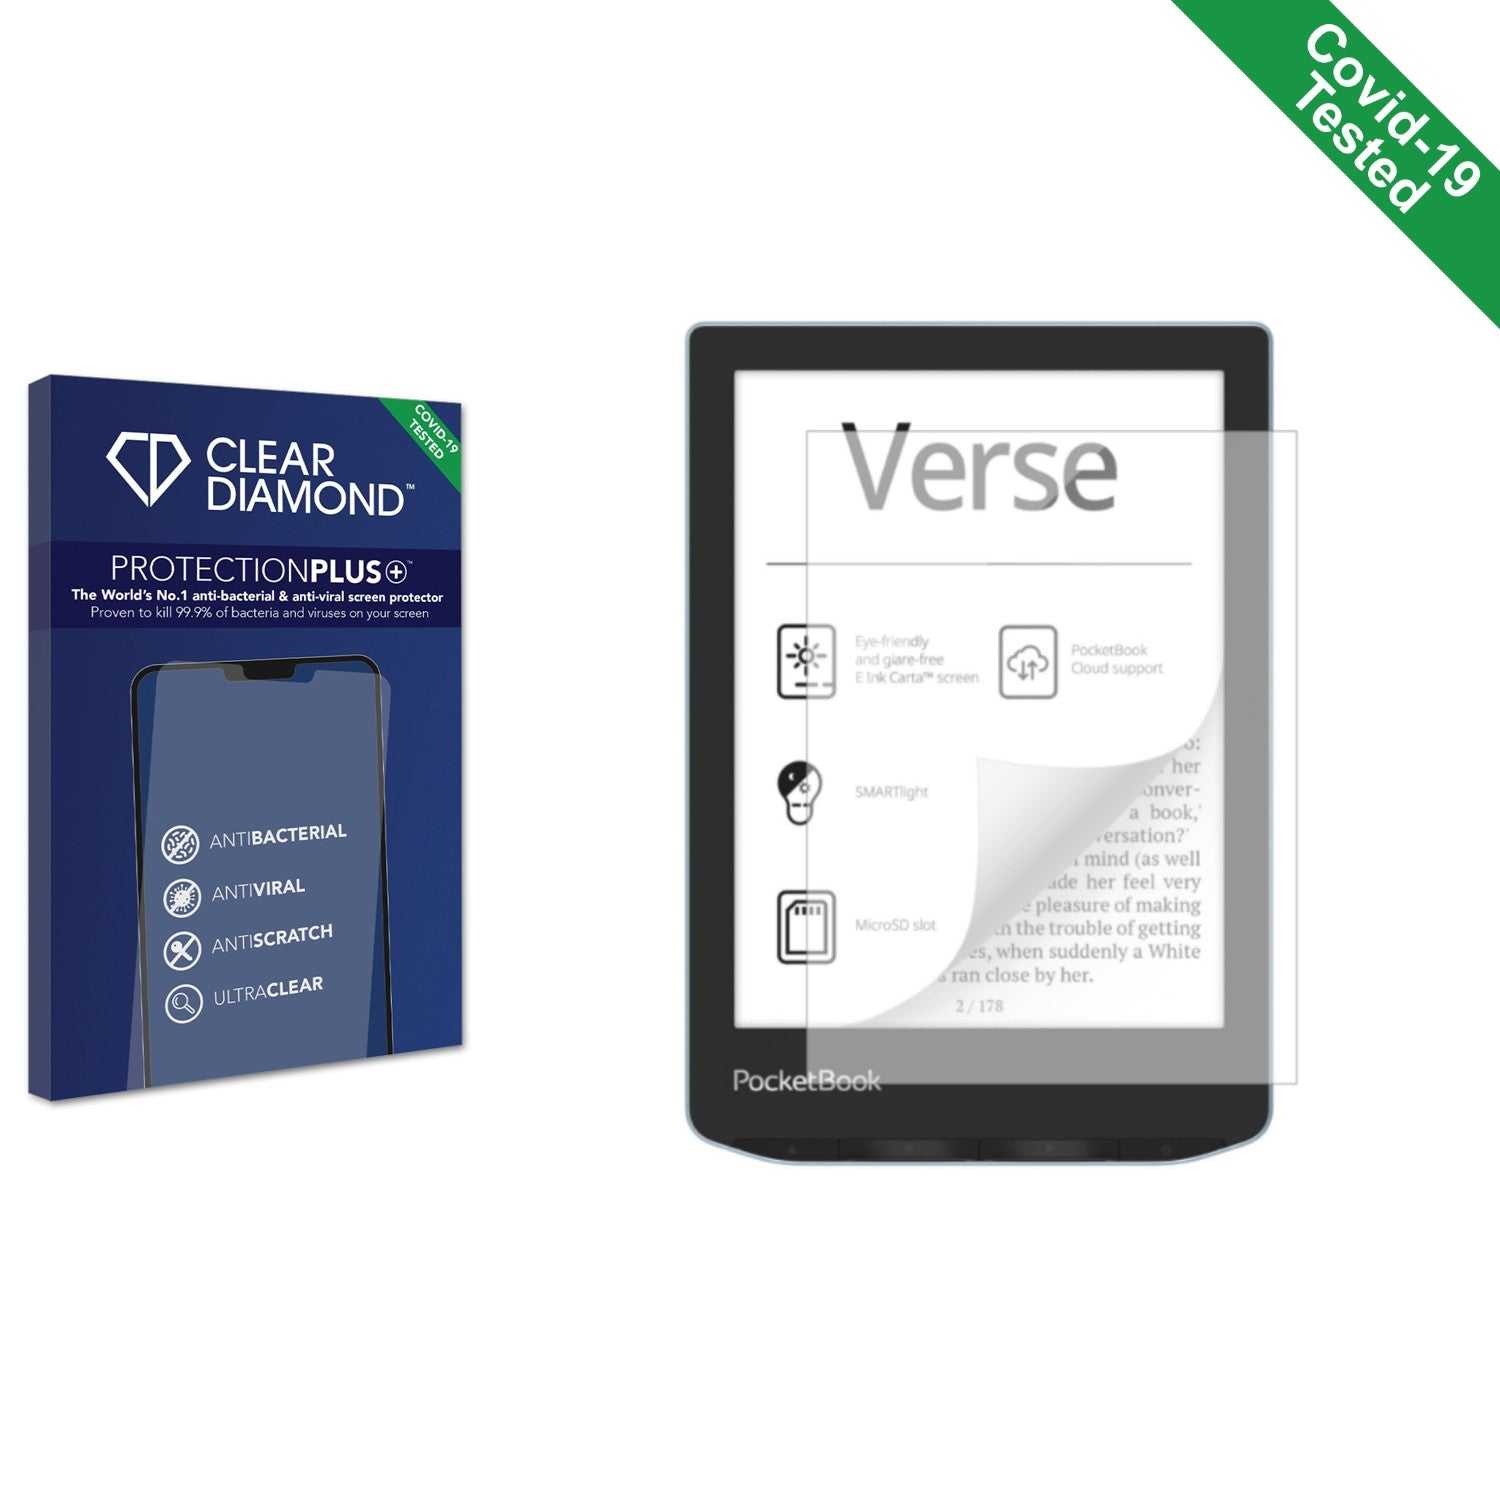 ScreenShield, Clear Diamond Anti-viral Screen Protector for PocketBook Verse